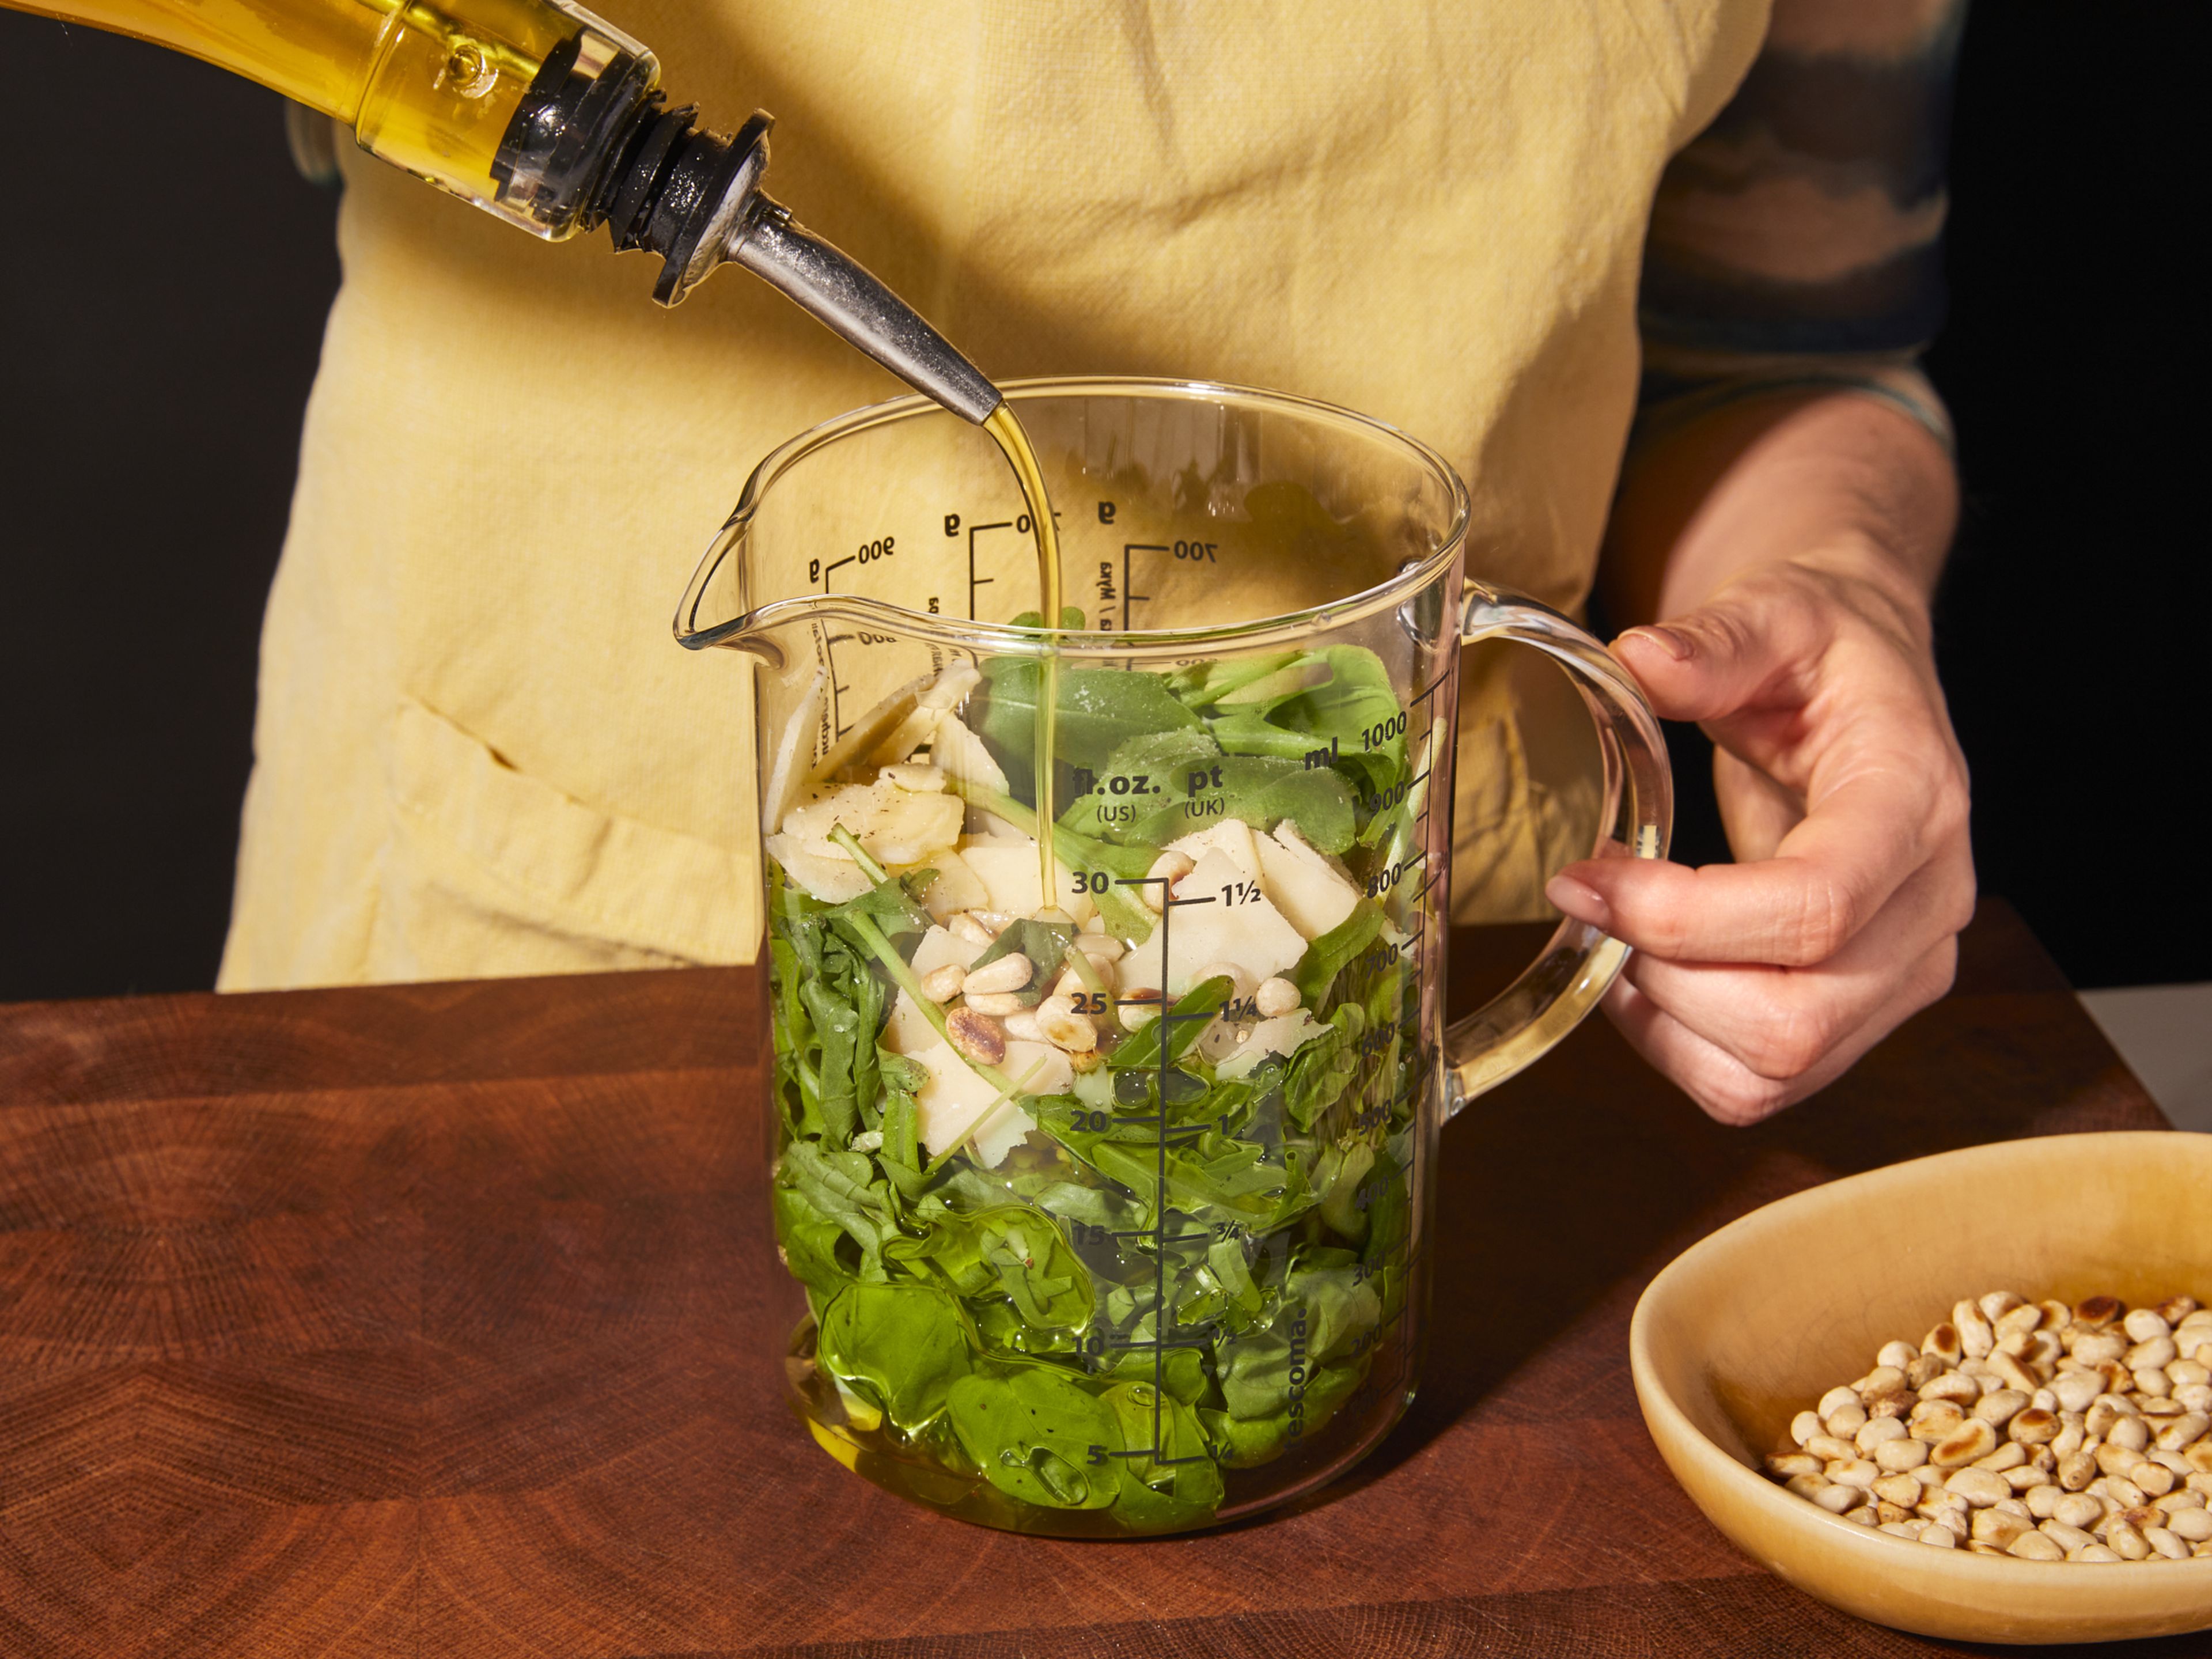 Into the container with garlic cloves, add half of the arugula, basil, ⅓ pine nuts, Parmesan, olive oil, salt, and pepper. Blend with an immersion blender until it’s a smooth pesto. Add water if desired to make it smoother.